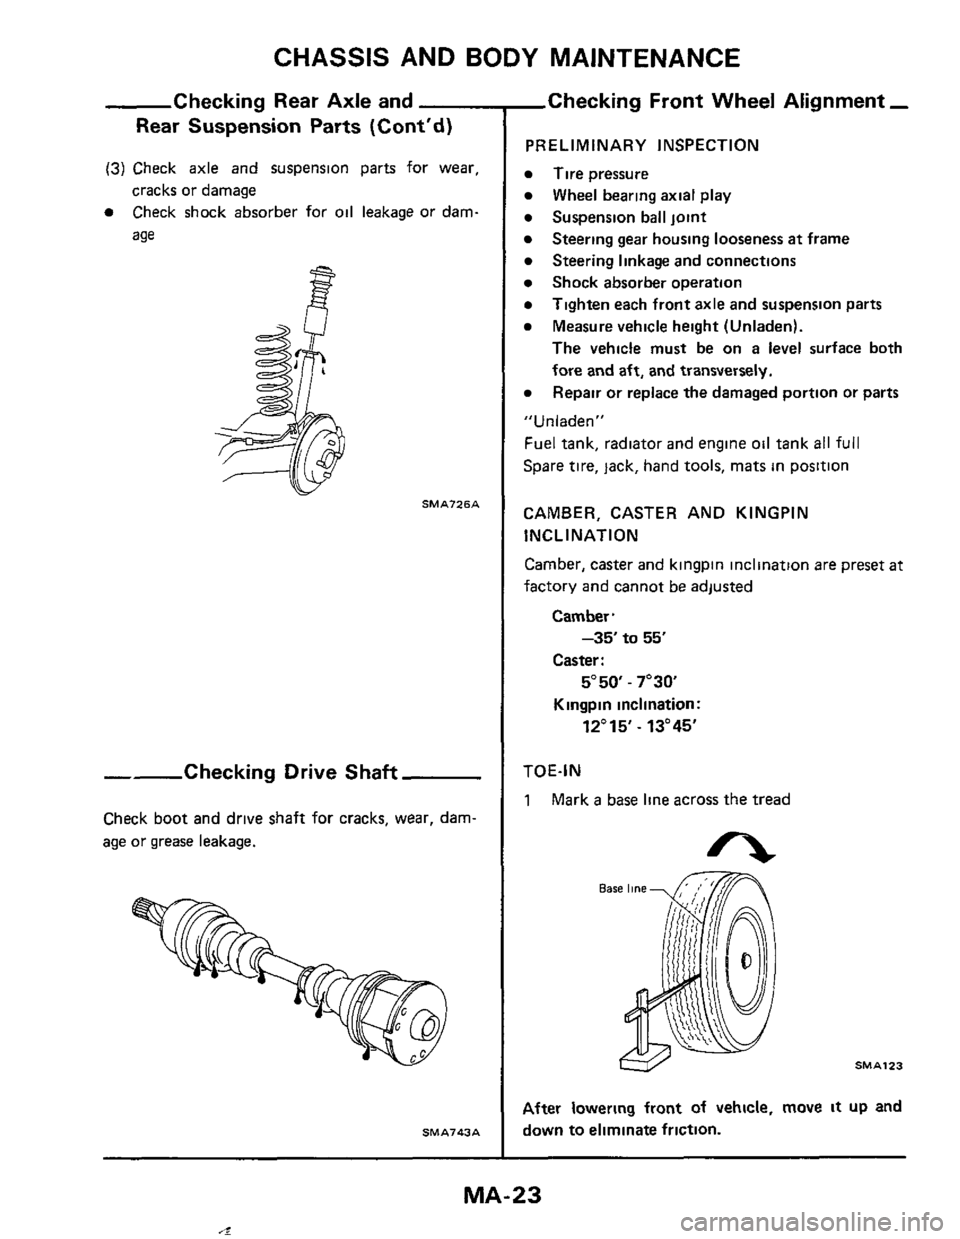 NISSAN 300ZX 1984 Z31 Maintenance Owners Manual CHASSIS AND BODY MAINTENANCE 
Checking  Rear Axle and 
Rear  Suspension  Parts (Contd) 
(3) Check  axle and suspension  parts for wear, 
cracks  or damage 
0 Check  shock absorber  for oil leakage or